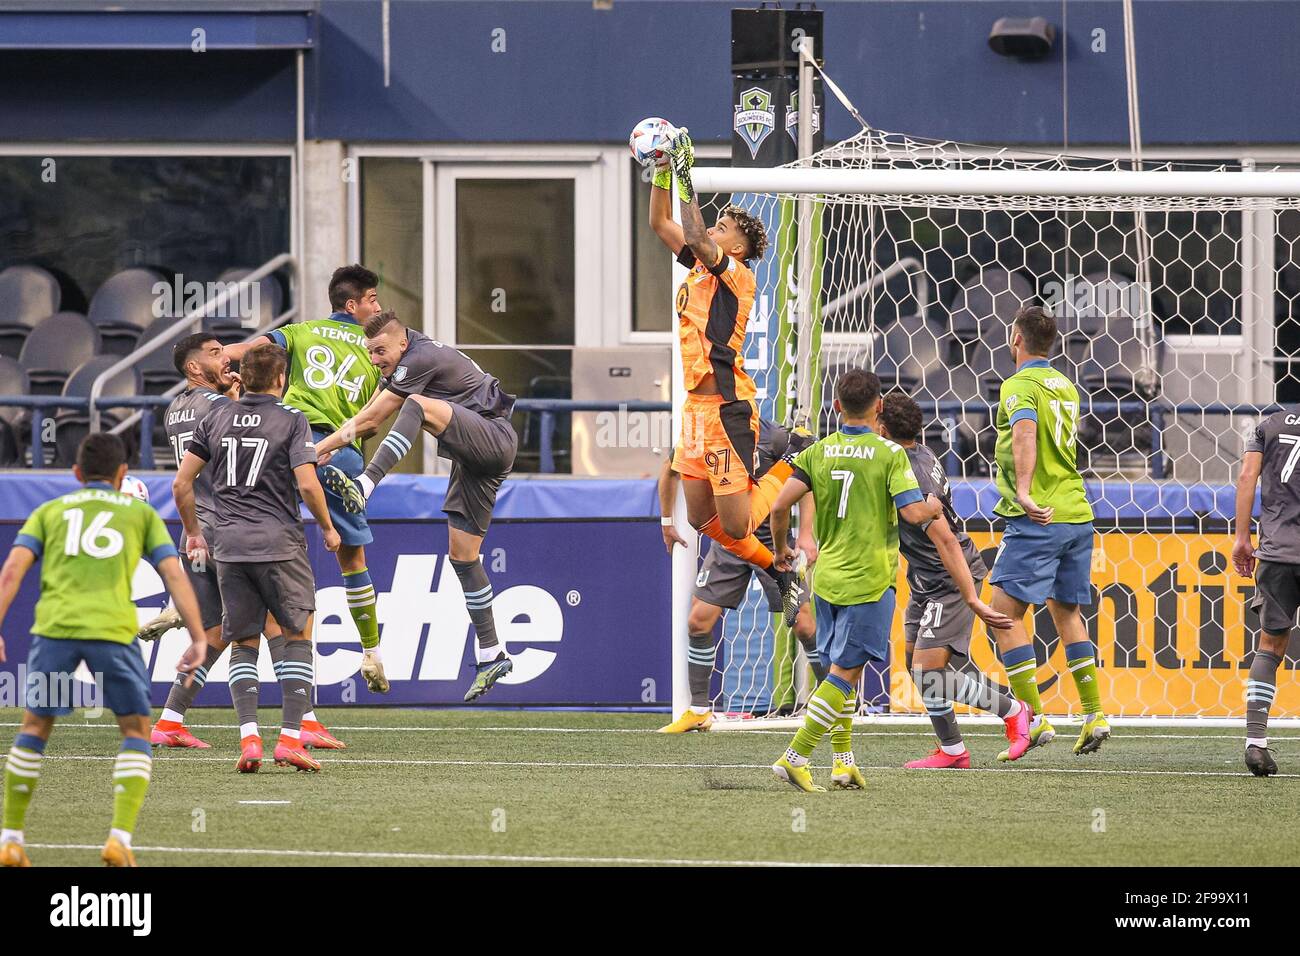 Minnesota United FC goalkeeper Dayne St. Clair (97) make a save during the first half of an MLS match against the Seattle Sounders FC at Lumen Field, Stock Photo